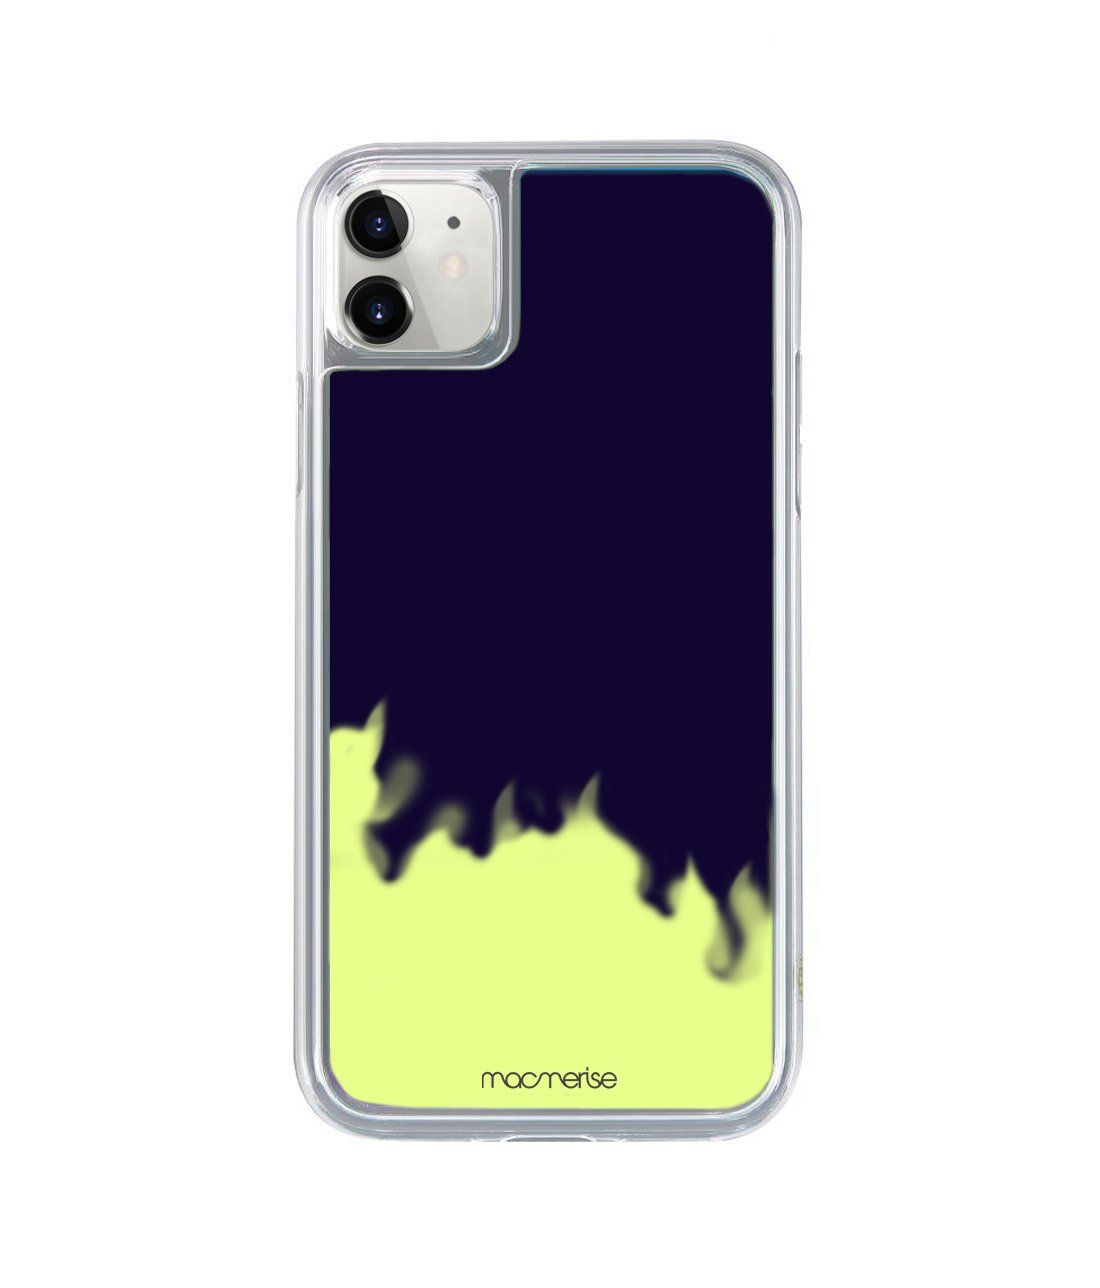 Neon Sand Blue - Neon Sand Phone Case for iPhone 11